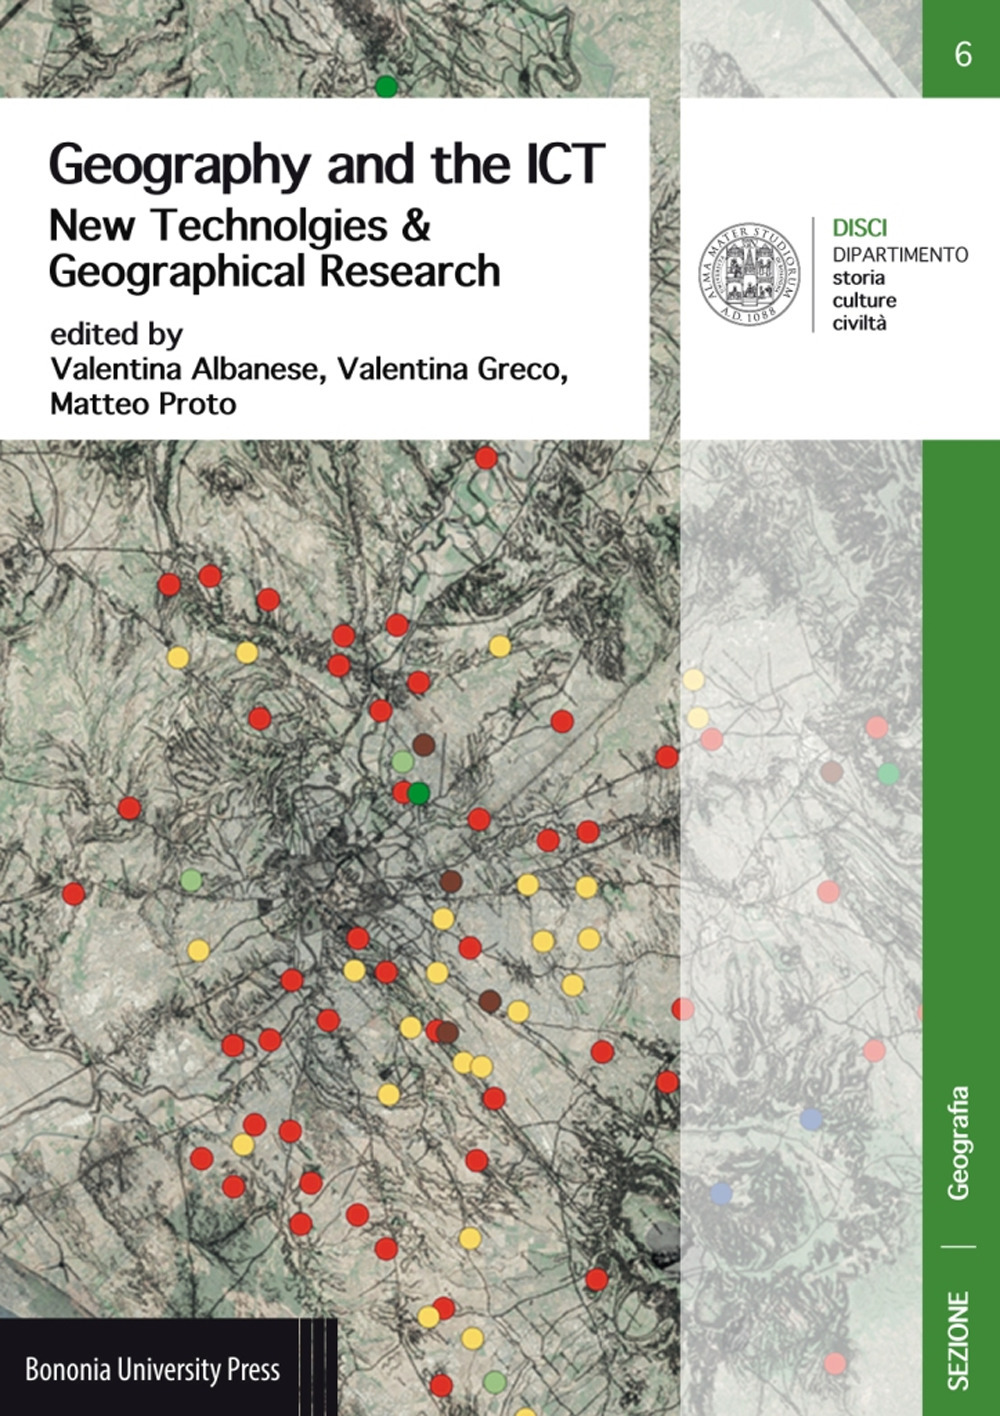 Geography and the ICT. New technologies & geographical research